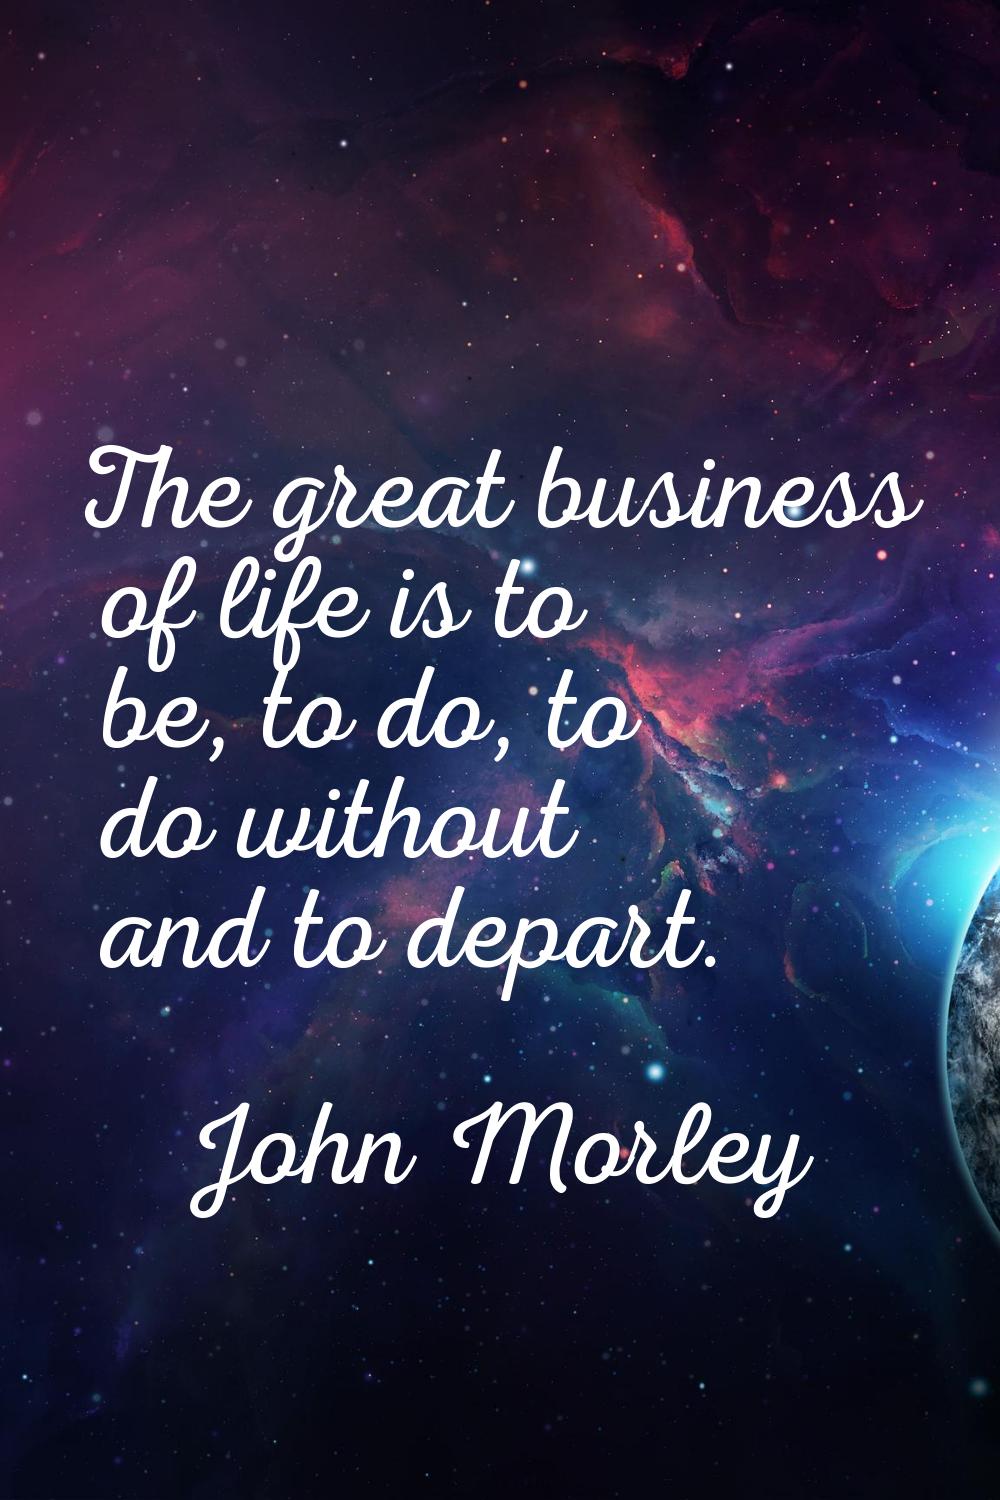 The great business of life is to be, to do, to do without and to depart.